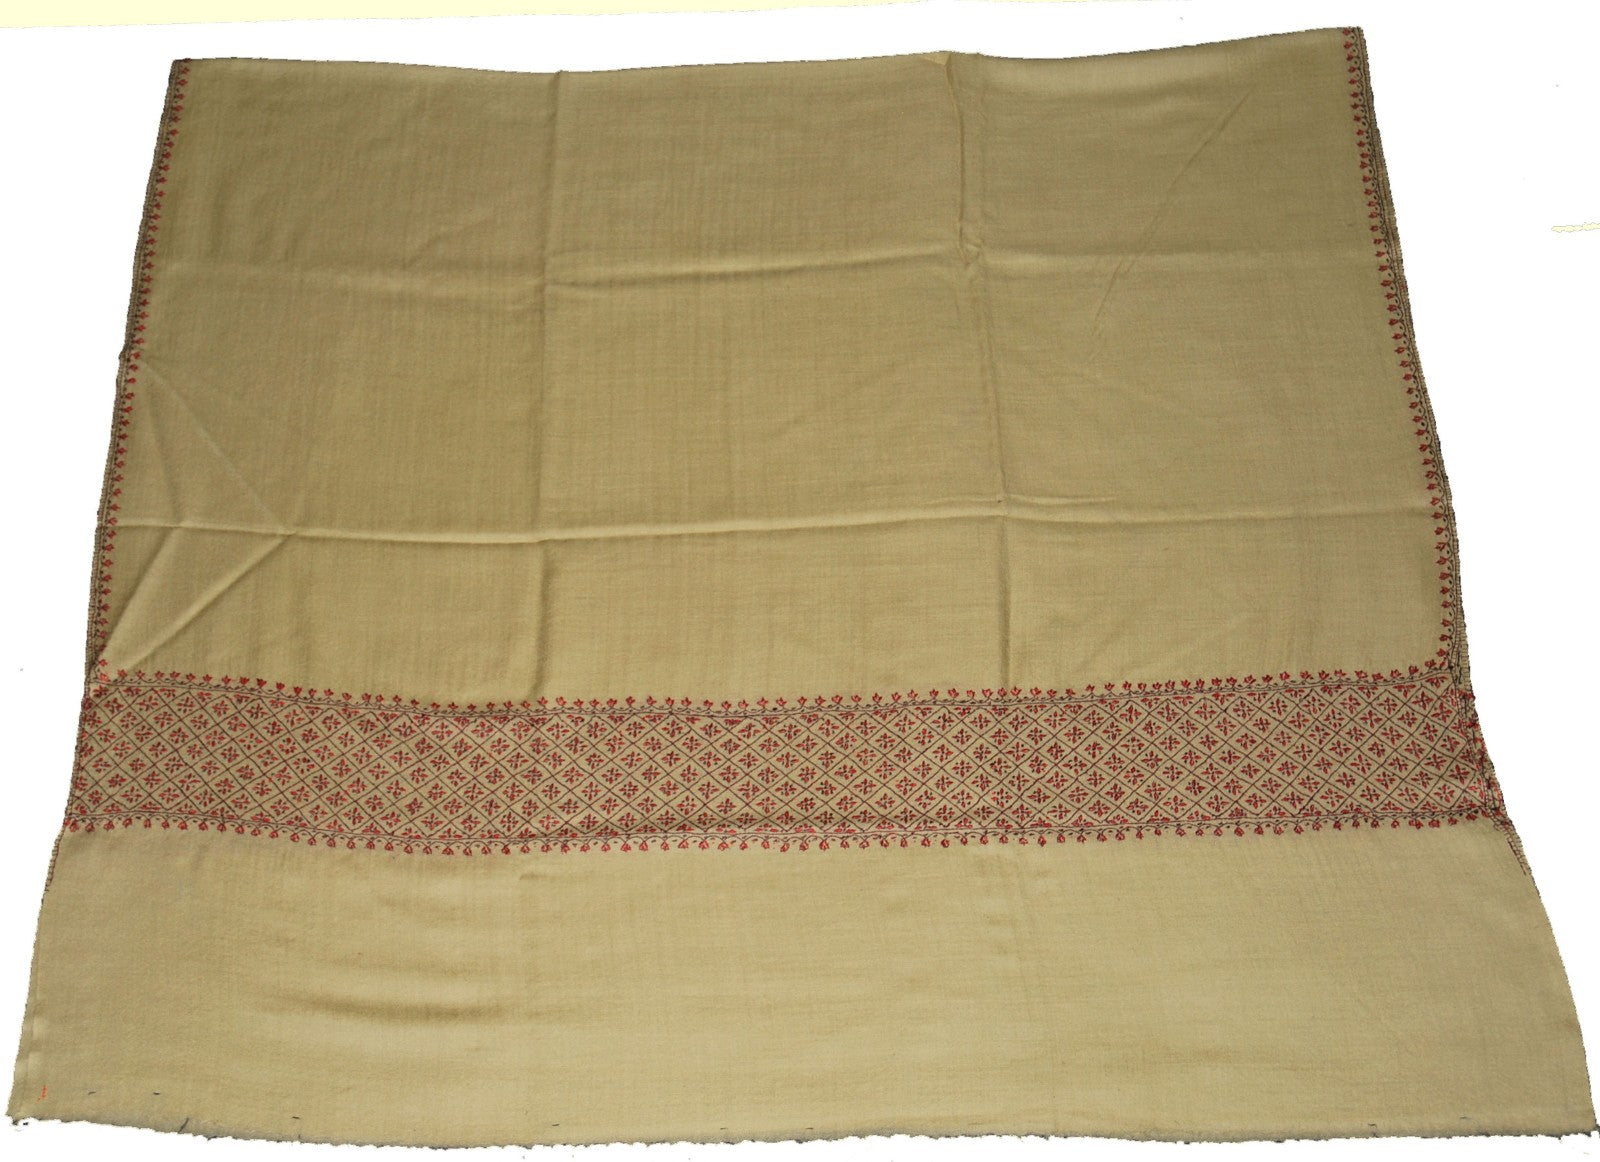 Hand Embroidered Woolen Shawl Wrap Throw Beige, Multicolor #WS-502